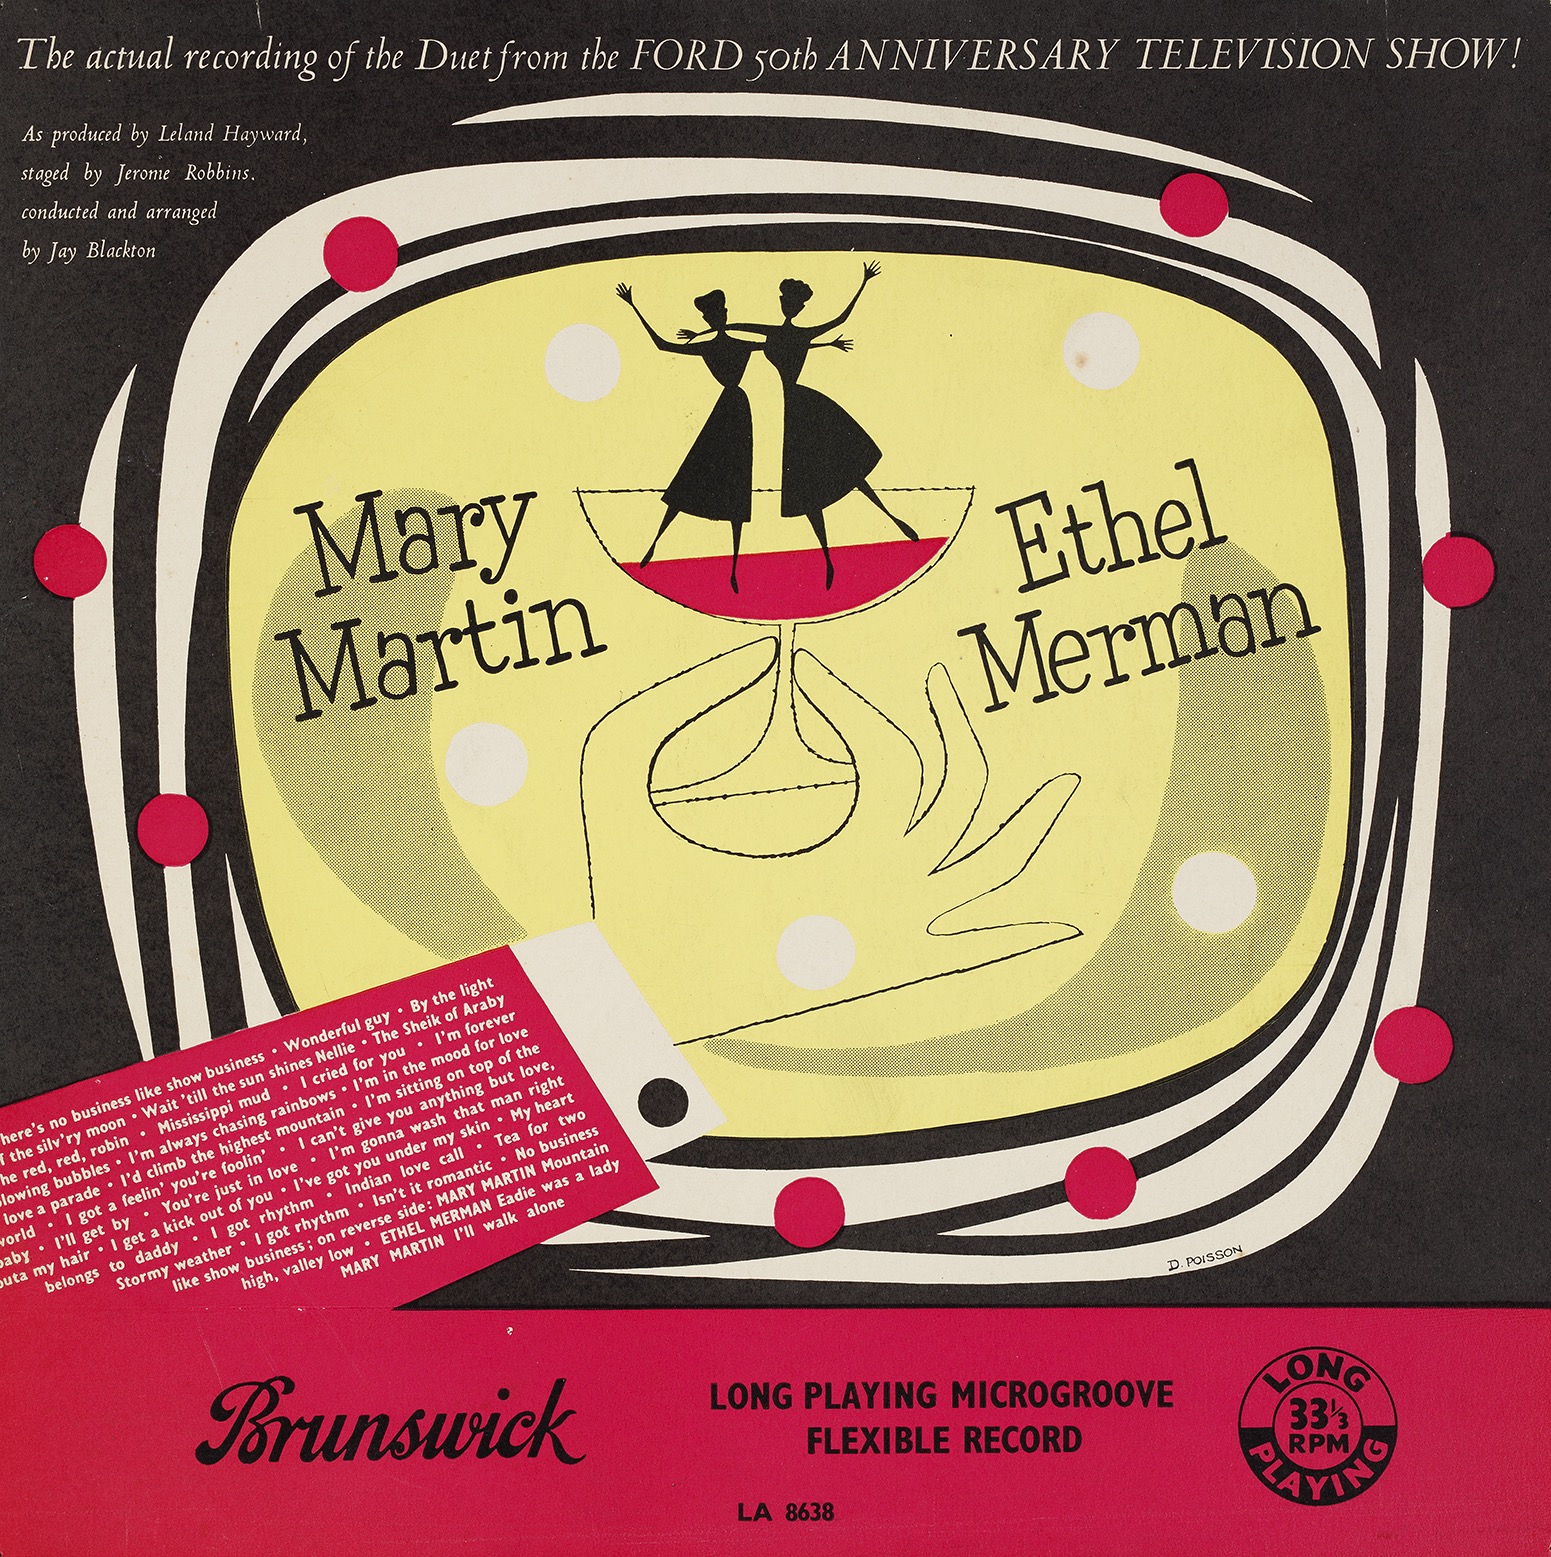 The record cover of the duet from the Ford 50th Anniversary Television Show